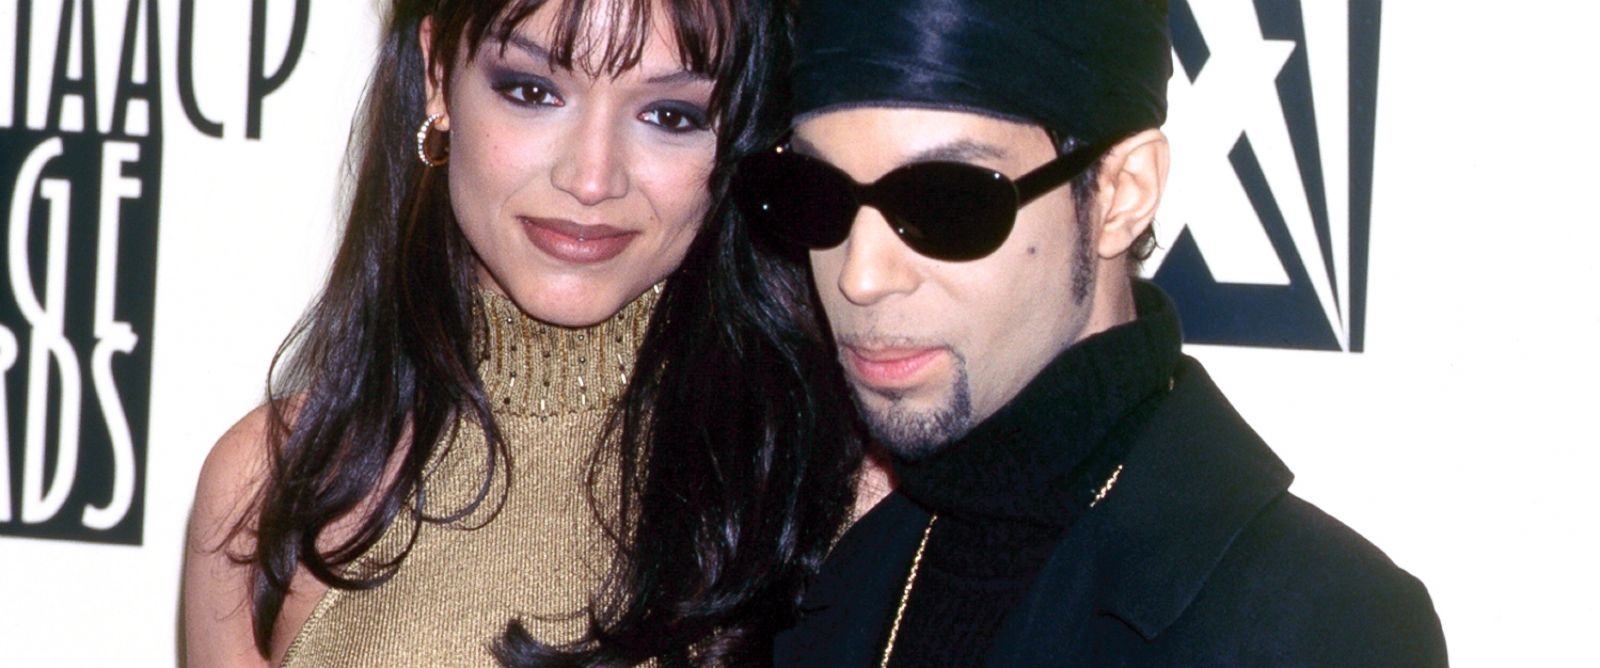 Mayte Garcia on the Prince you didn’t know